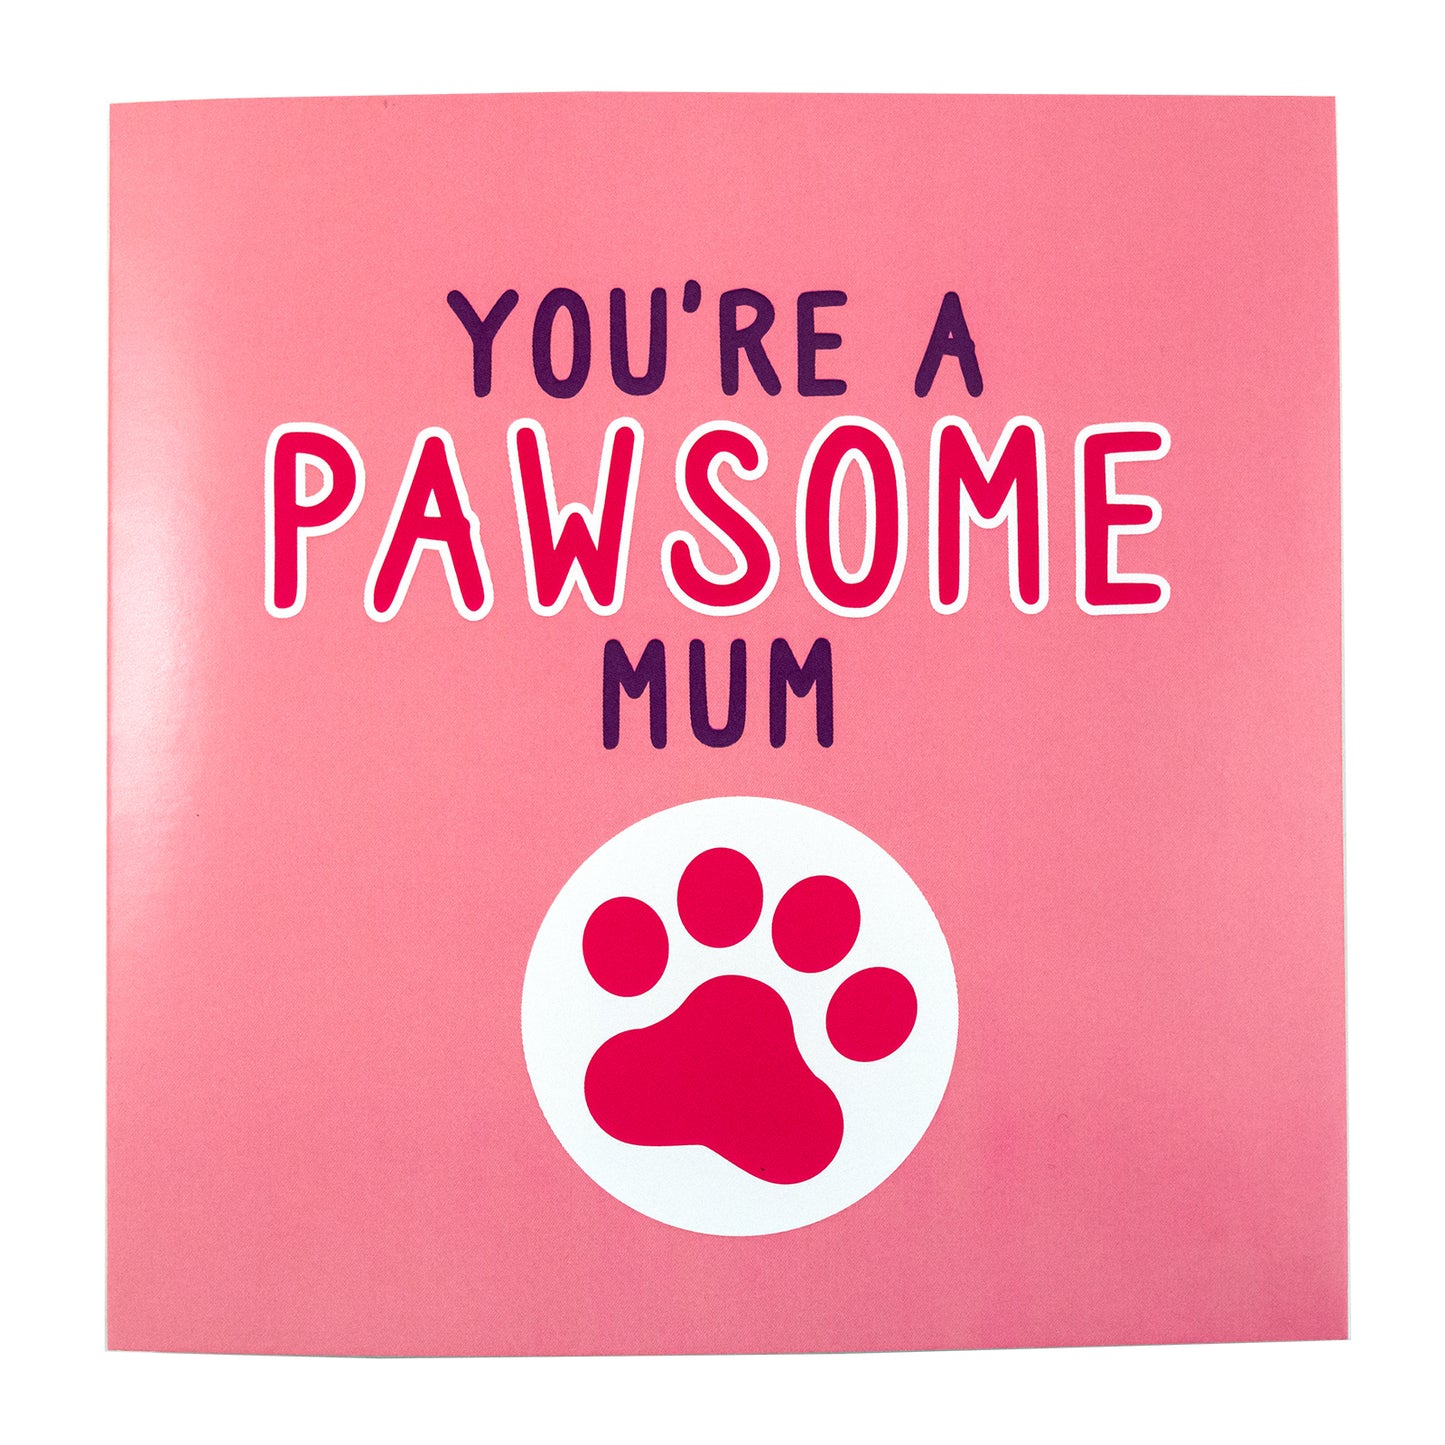 You're a Pawsome mum Mothers Day card from the dog- from the cat UK